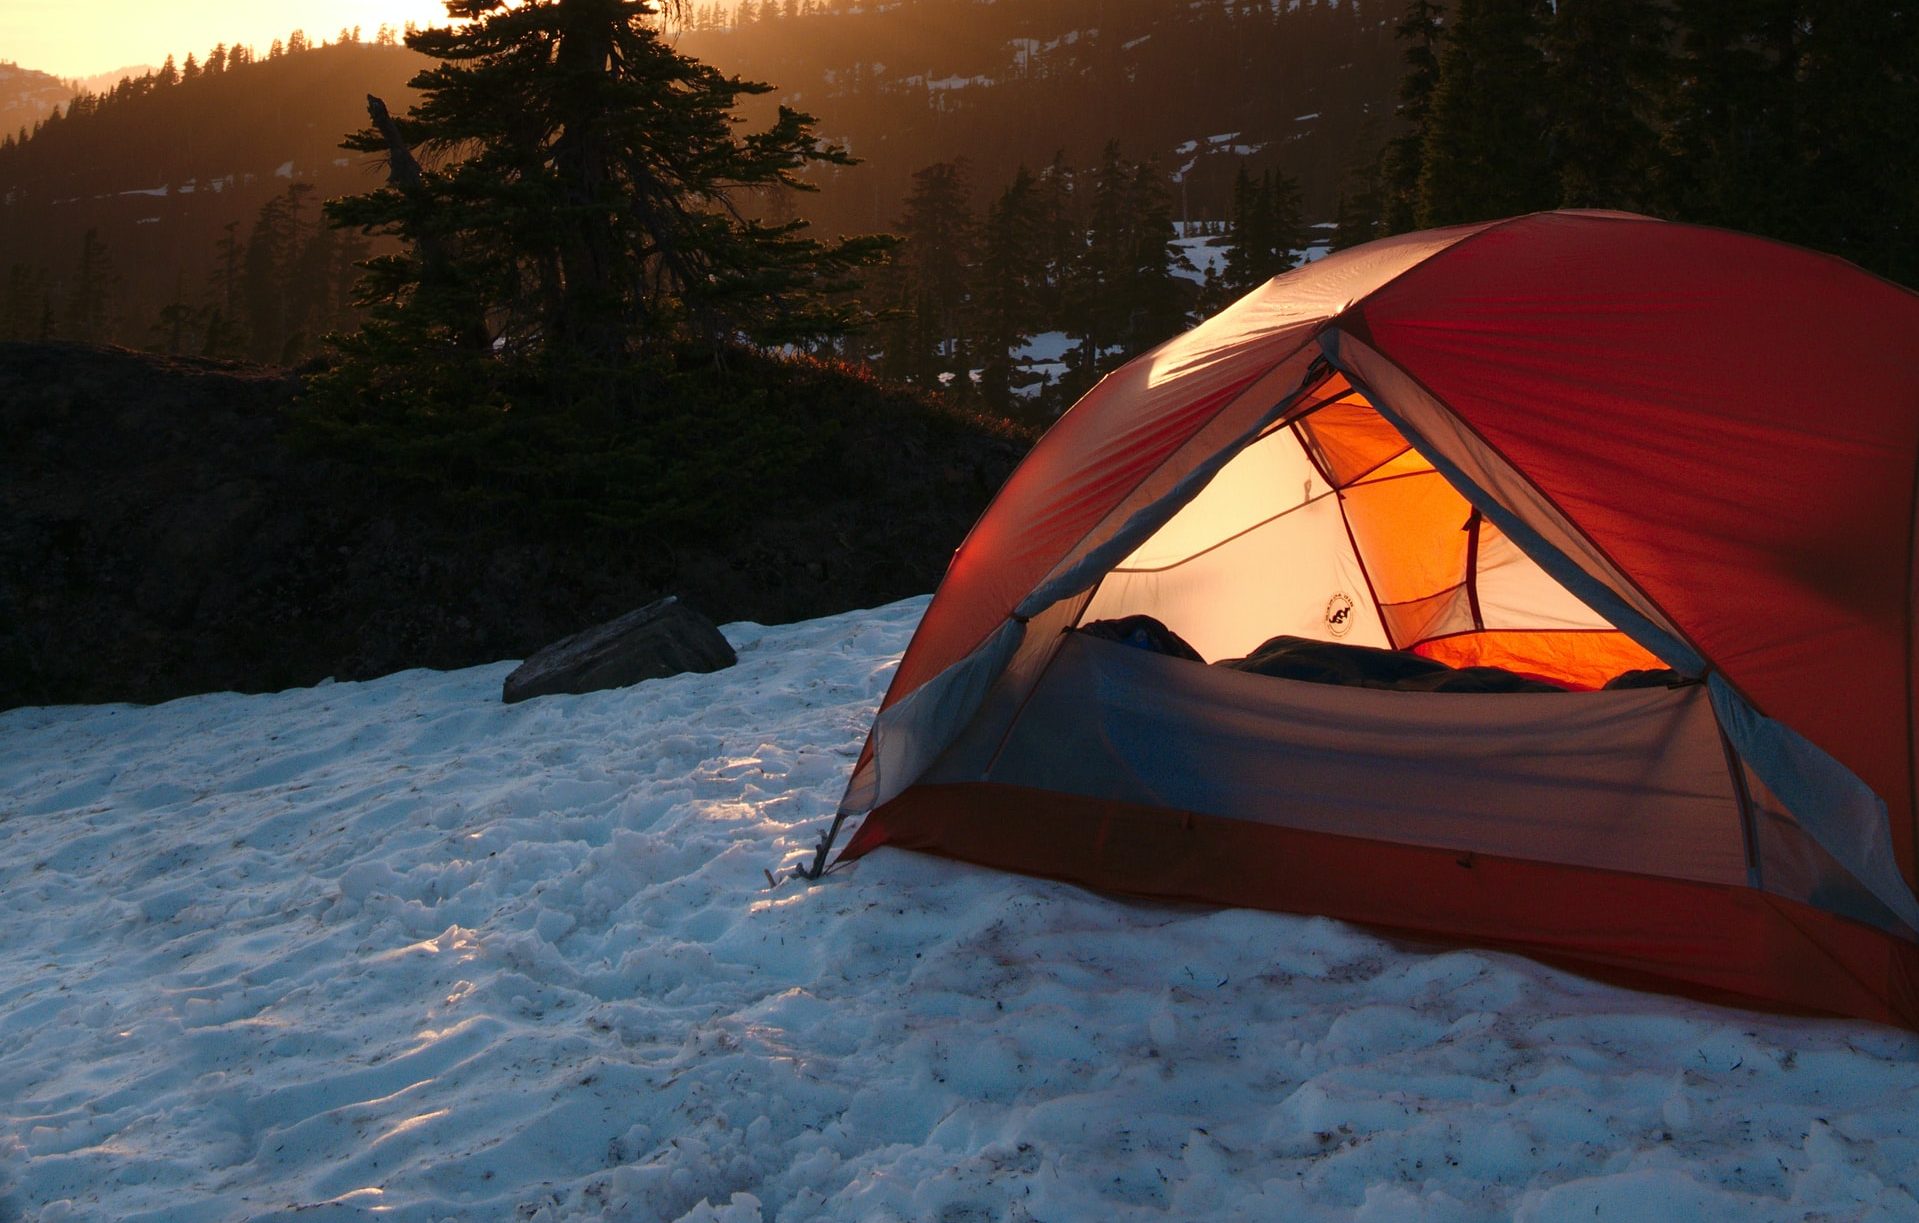 Winter camping tent